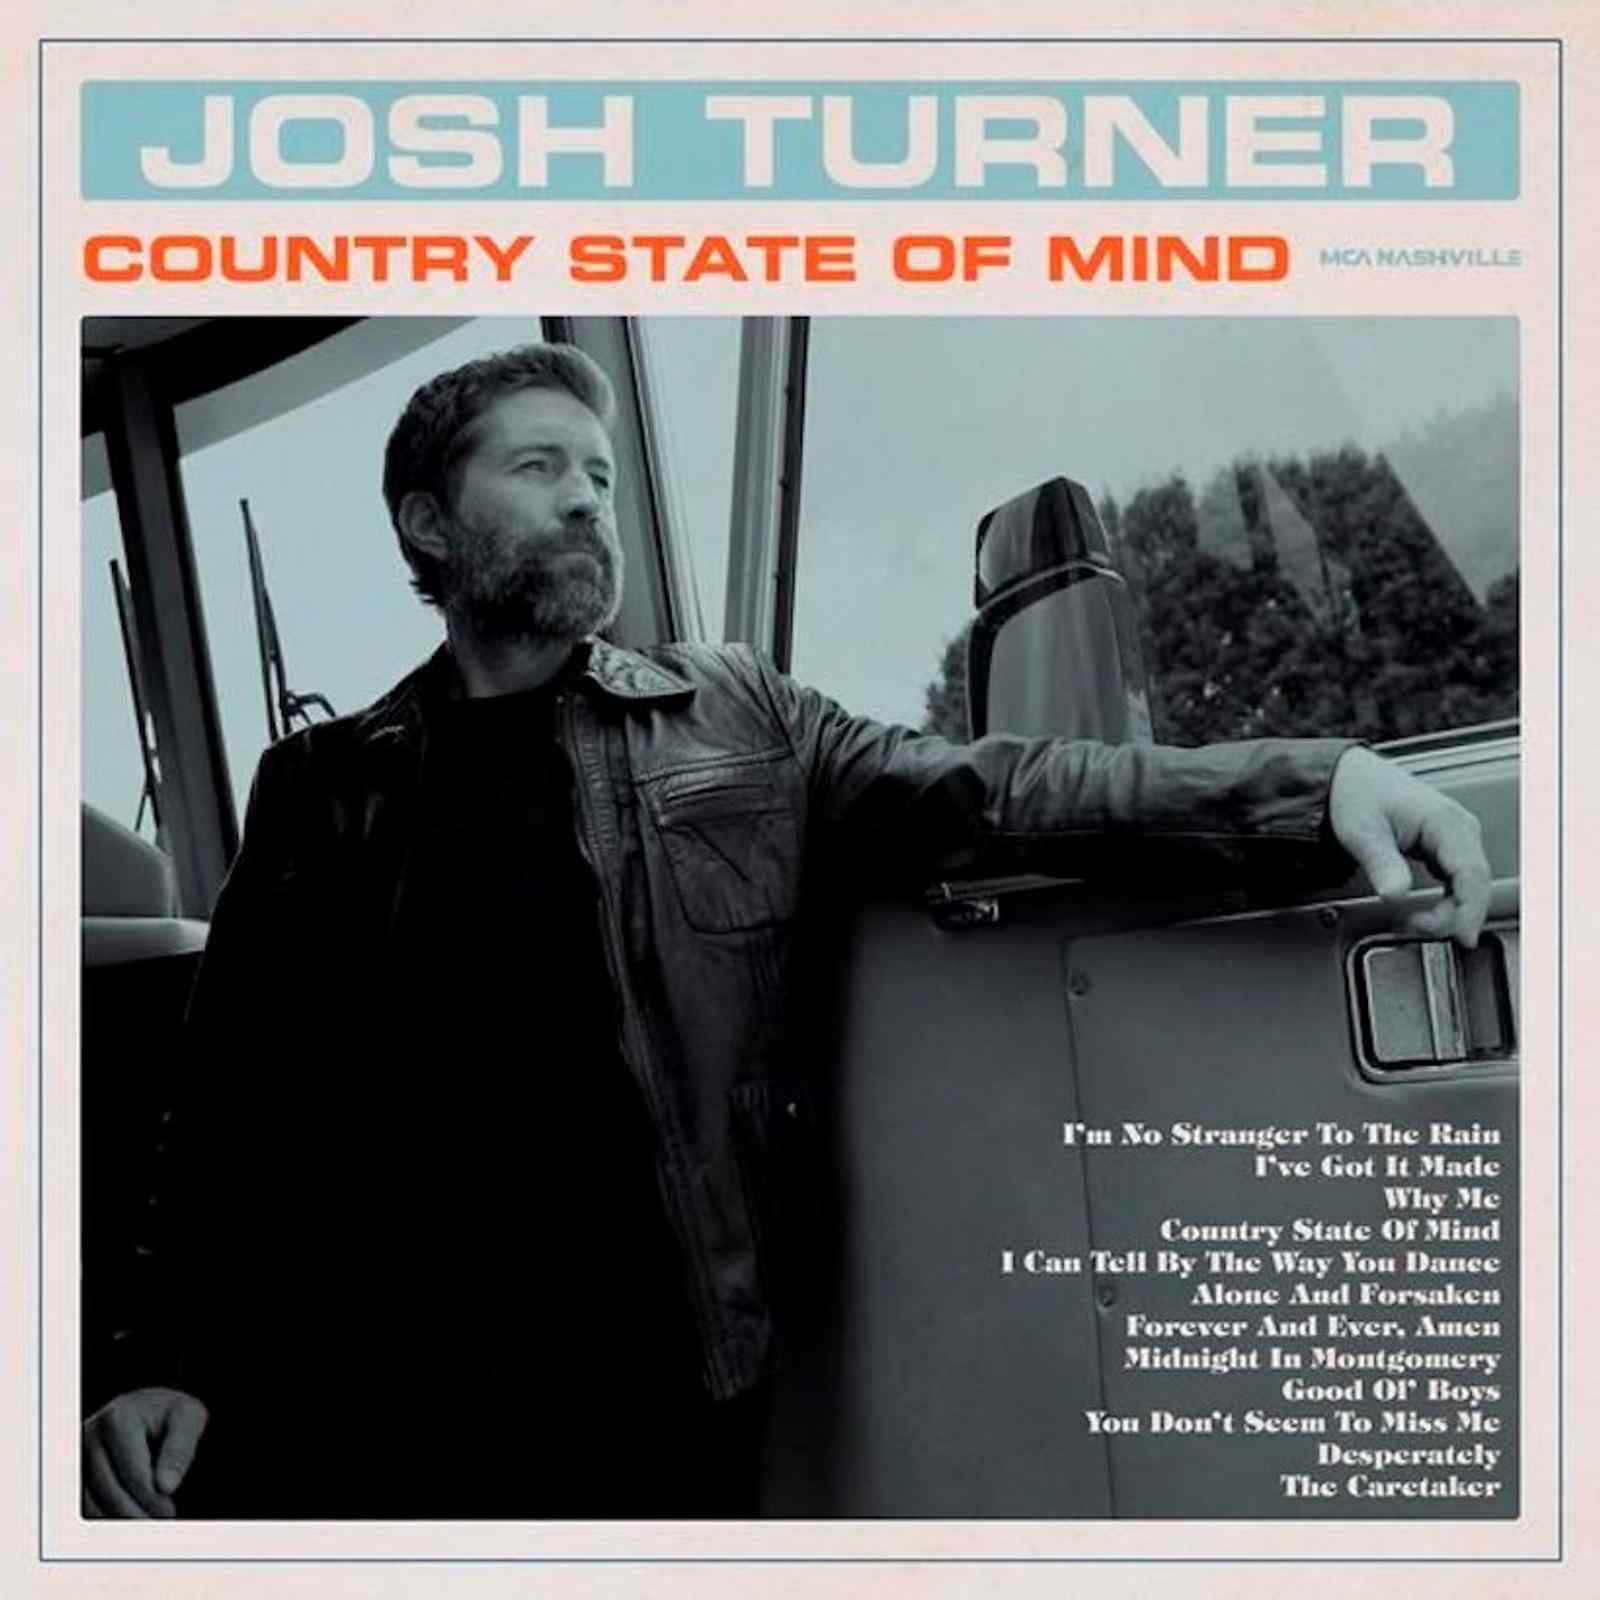 Country State of Mind by Josh Turner